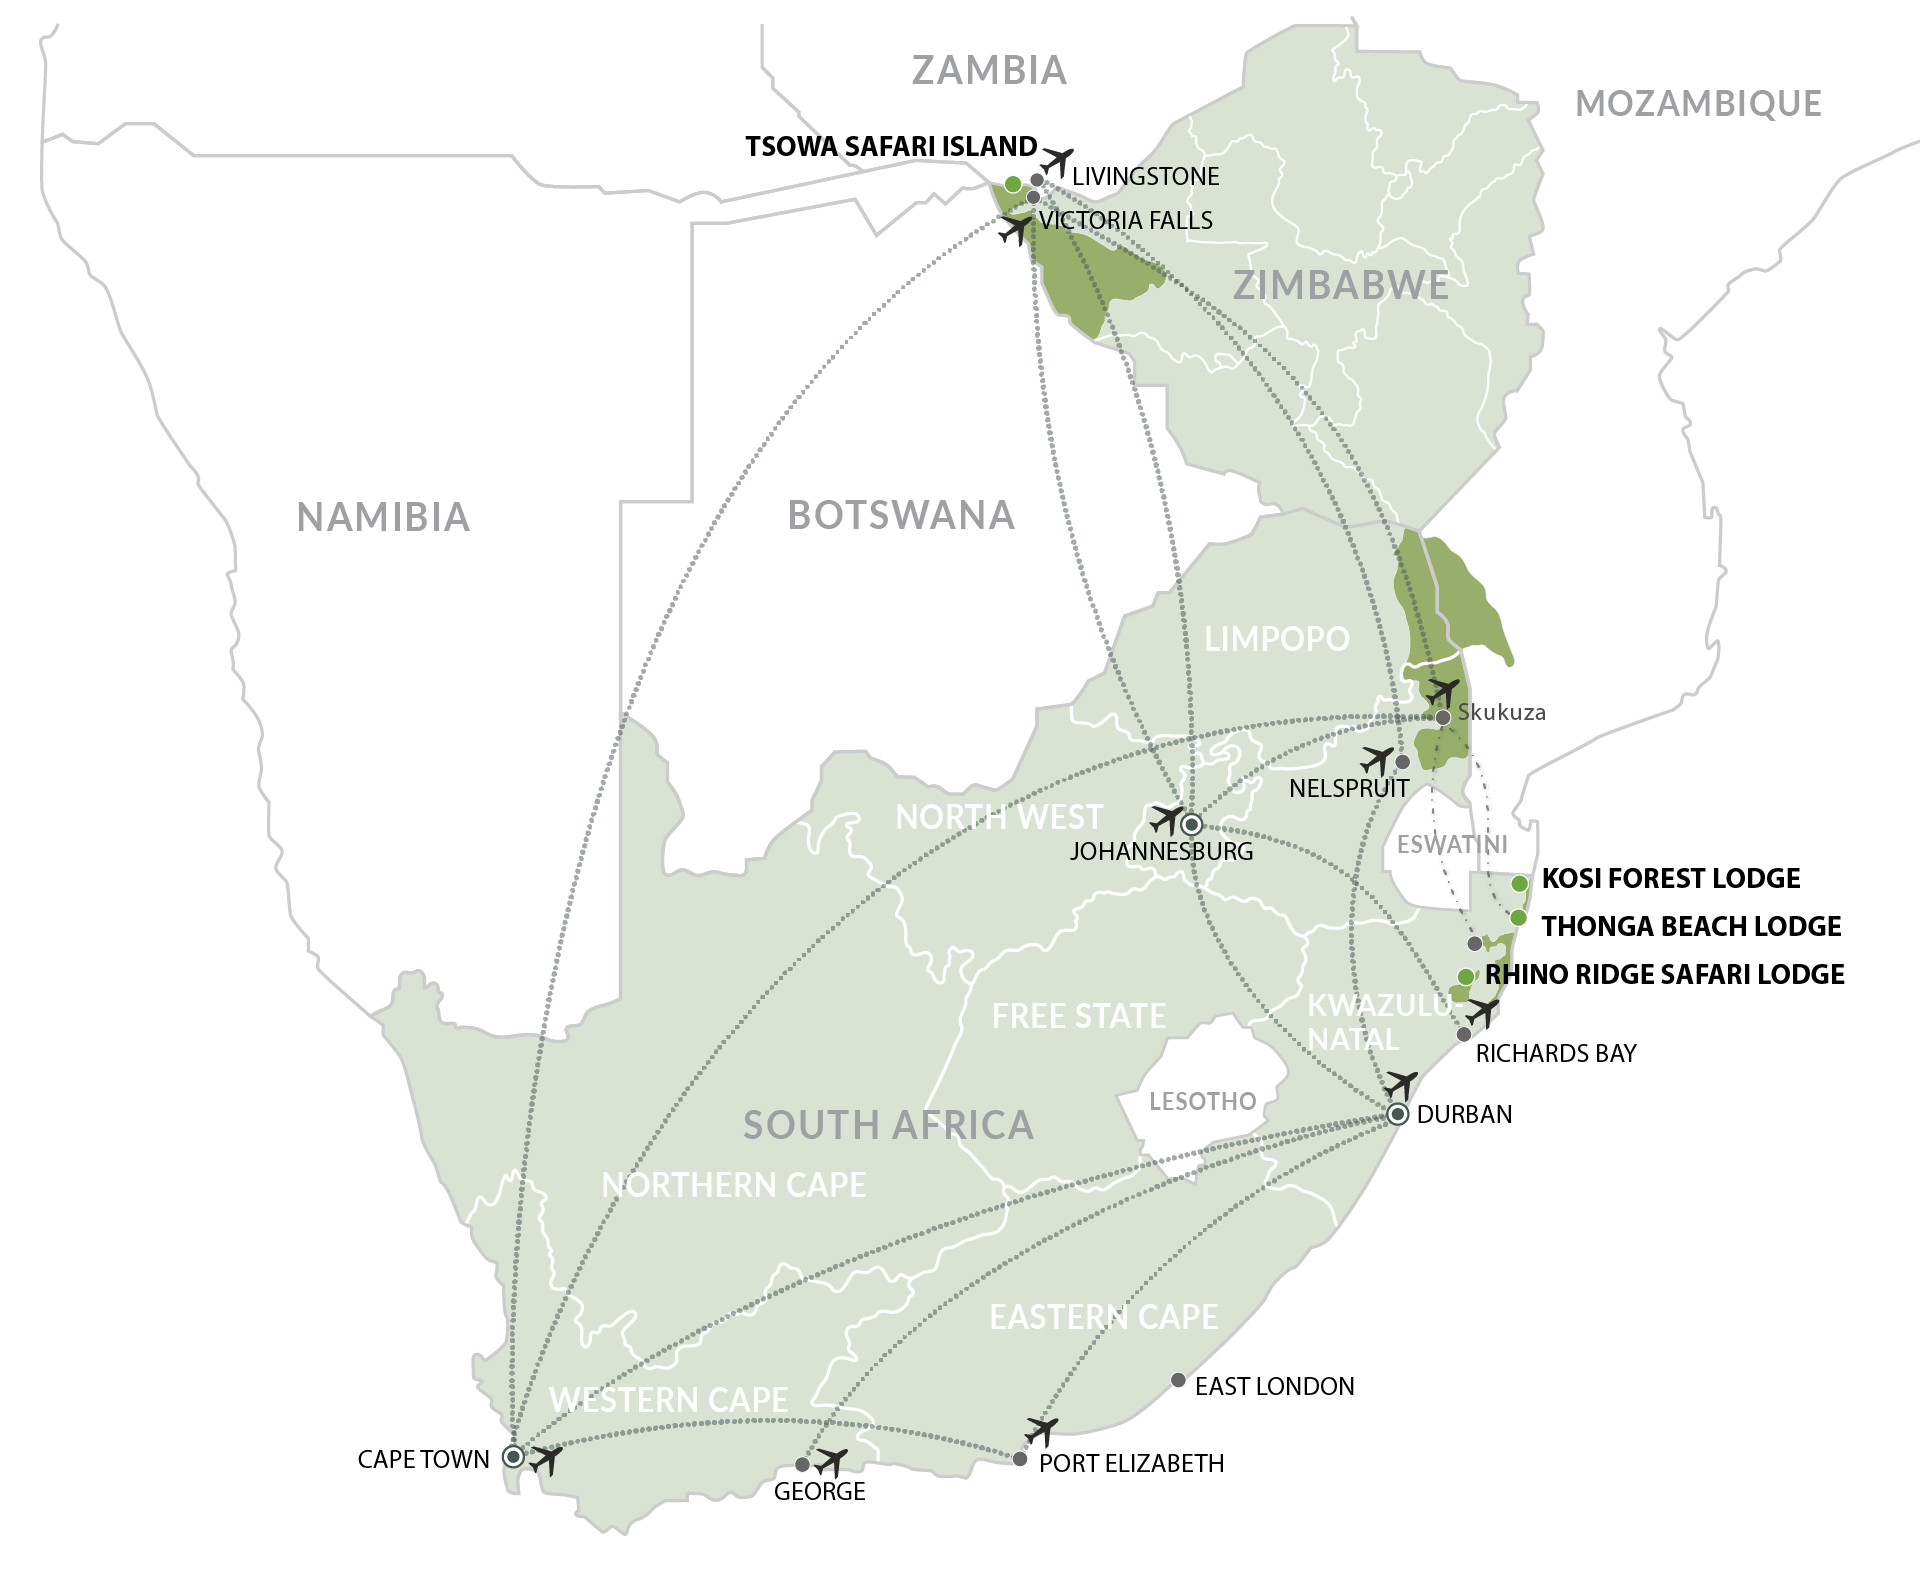 IAL MAPS - Southern Africa_Individual Lodges